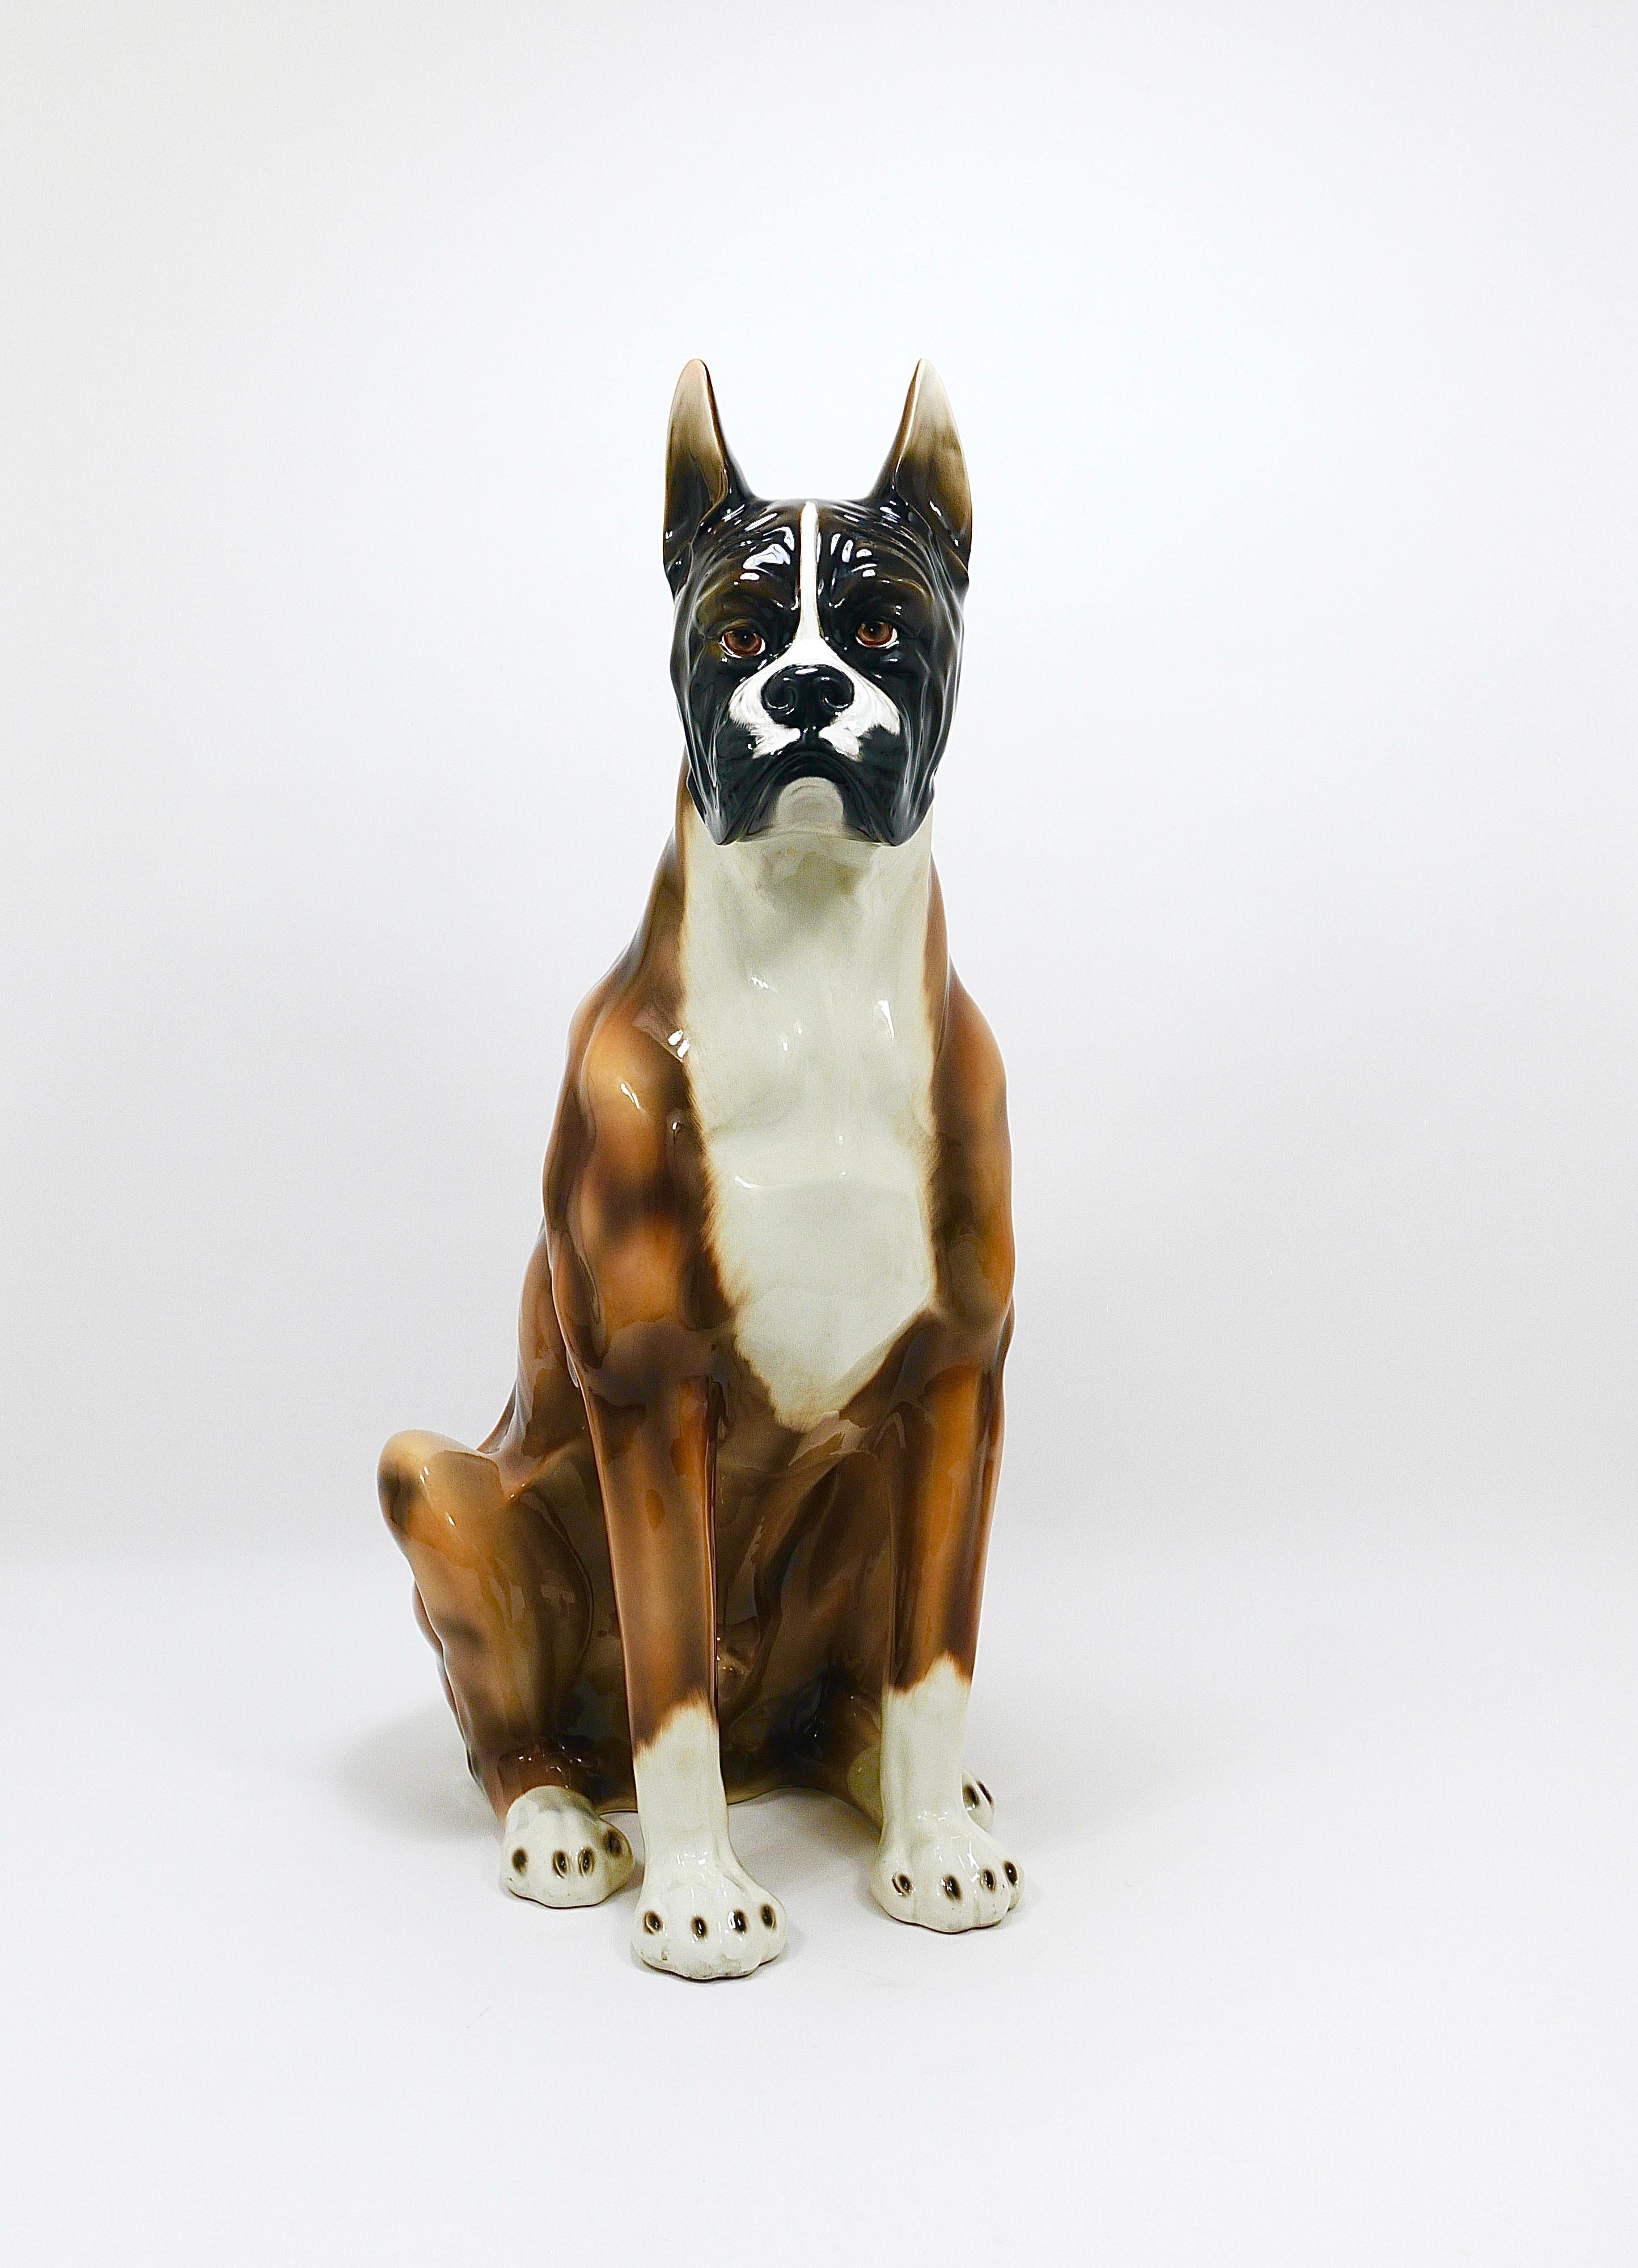 An eye-catching and ornamental vintage life-size figurine of a boxer dog, standing 34 inches tall. This handcrafted and hand-painted statue, made from glazed ceramic/pottery, was produced in Italy during the 1970s. It remains in very good condition,